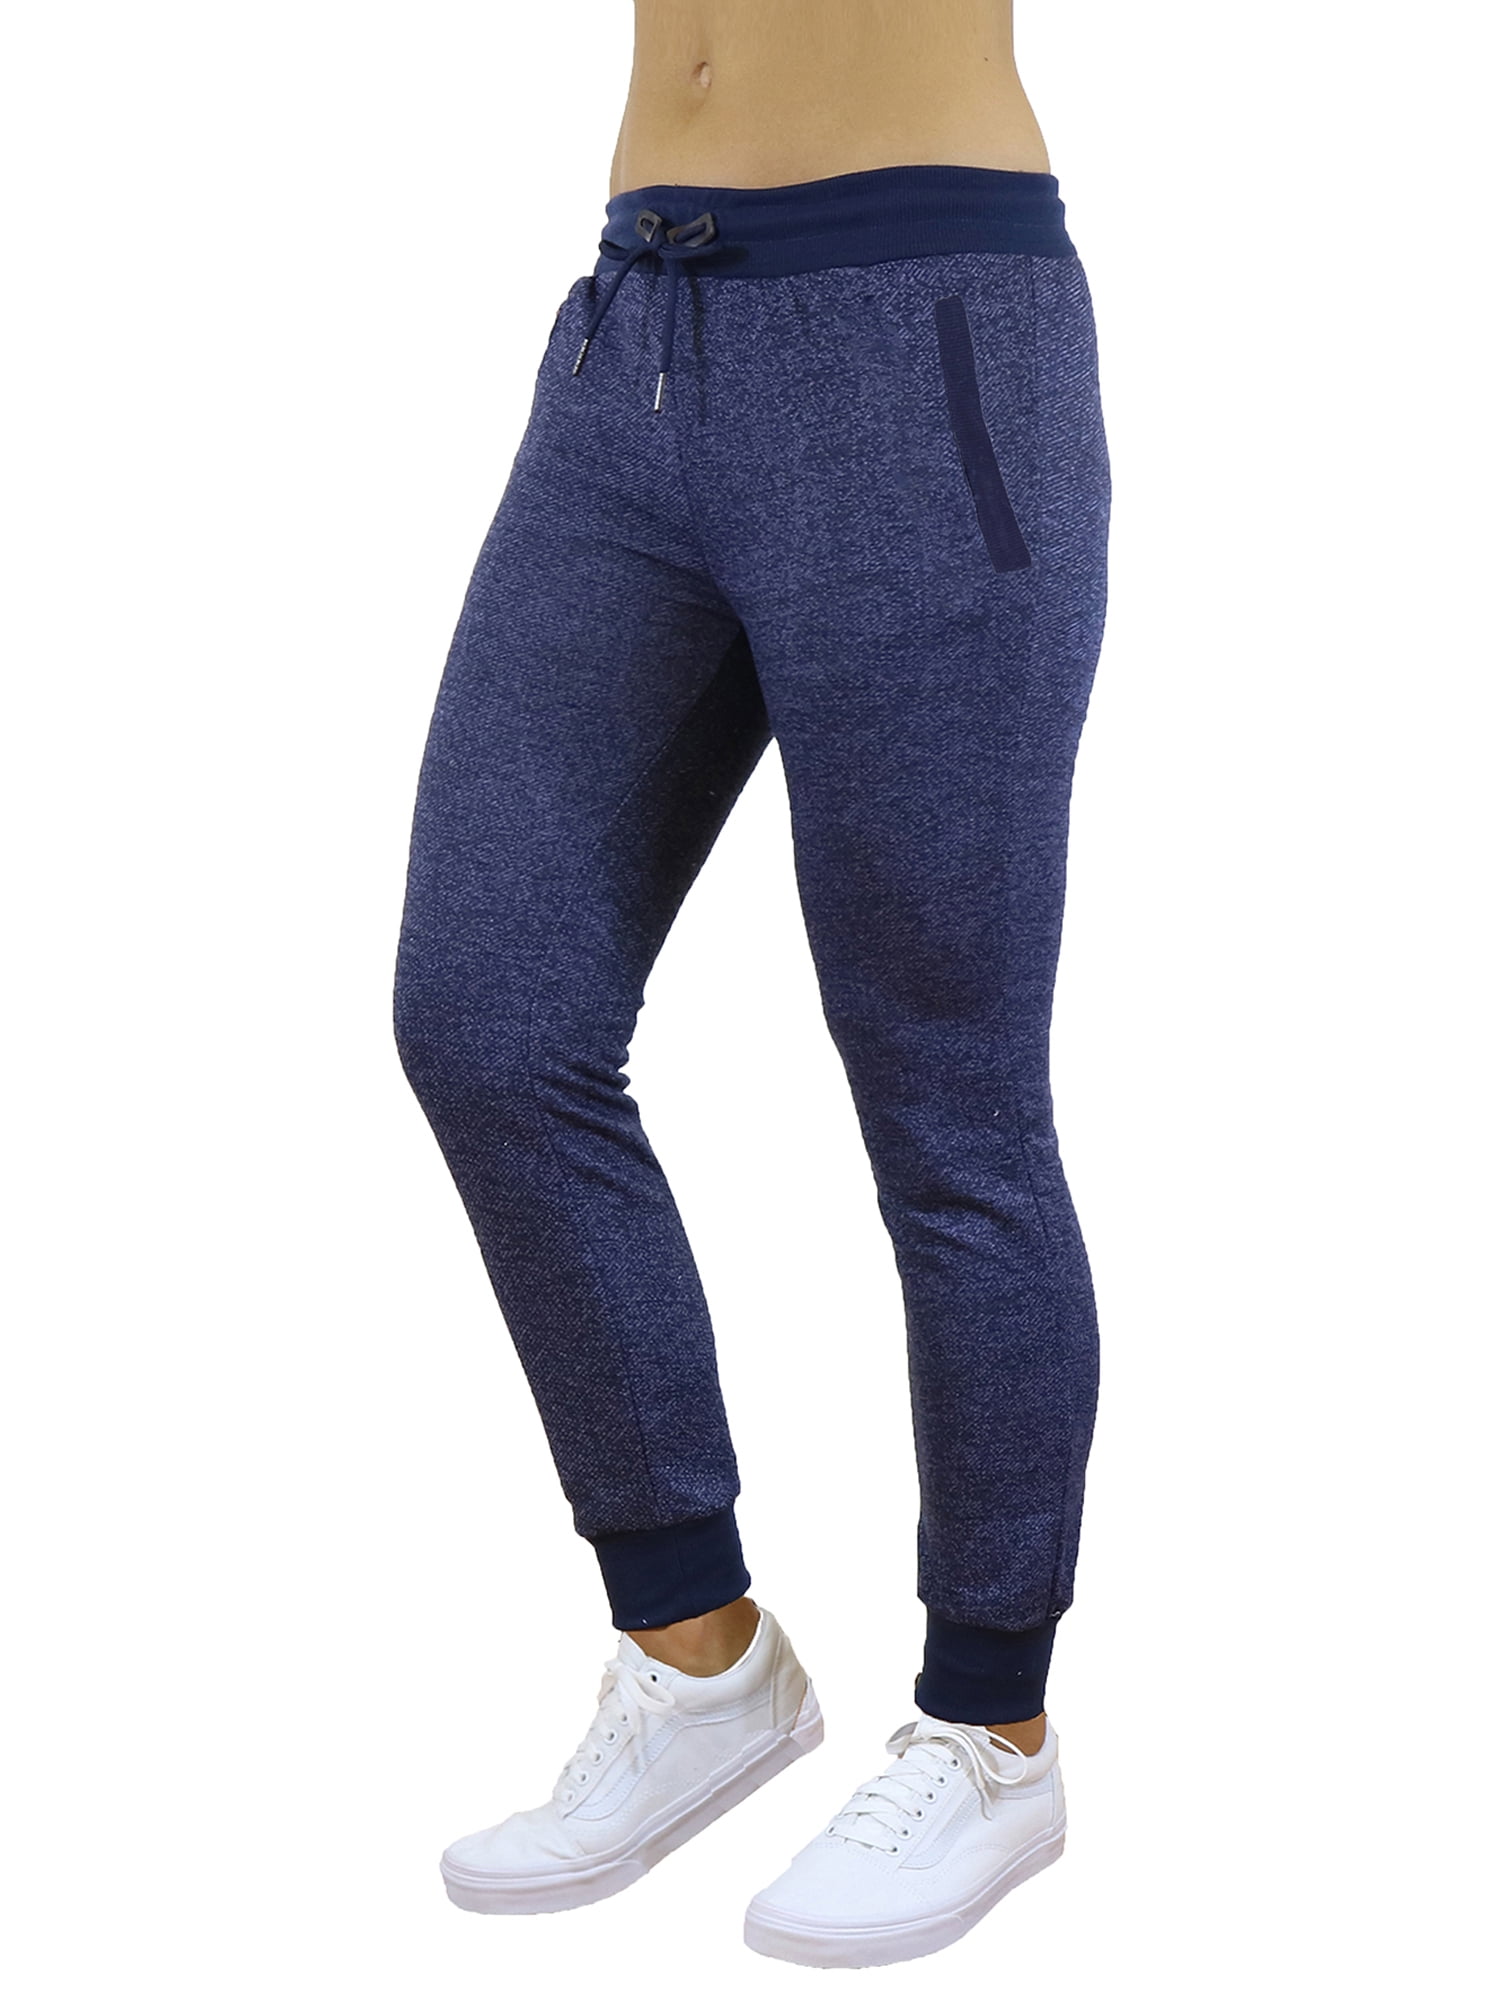 GBH - Women's Slim-Fit French Terry Jogger Sweatpants - Walmart.com ...